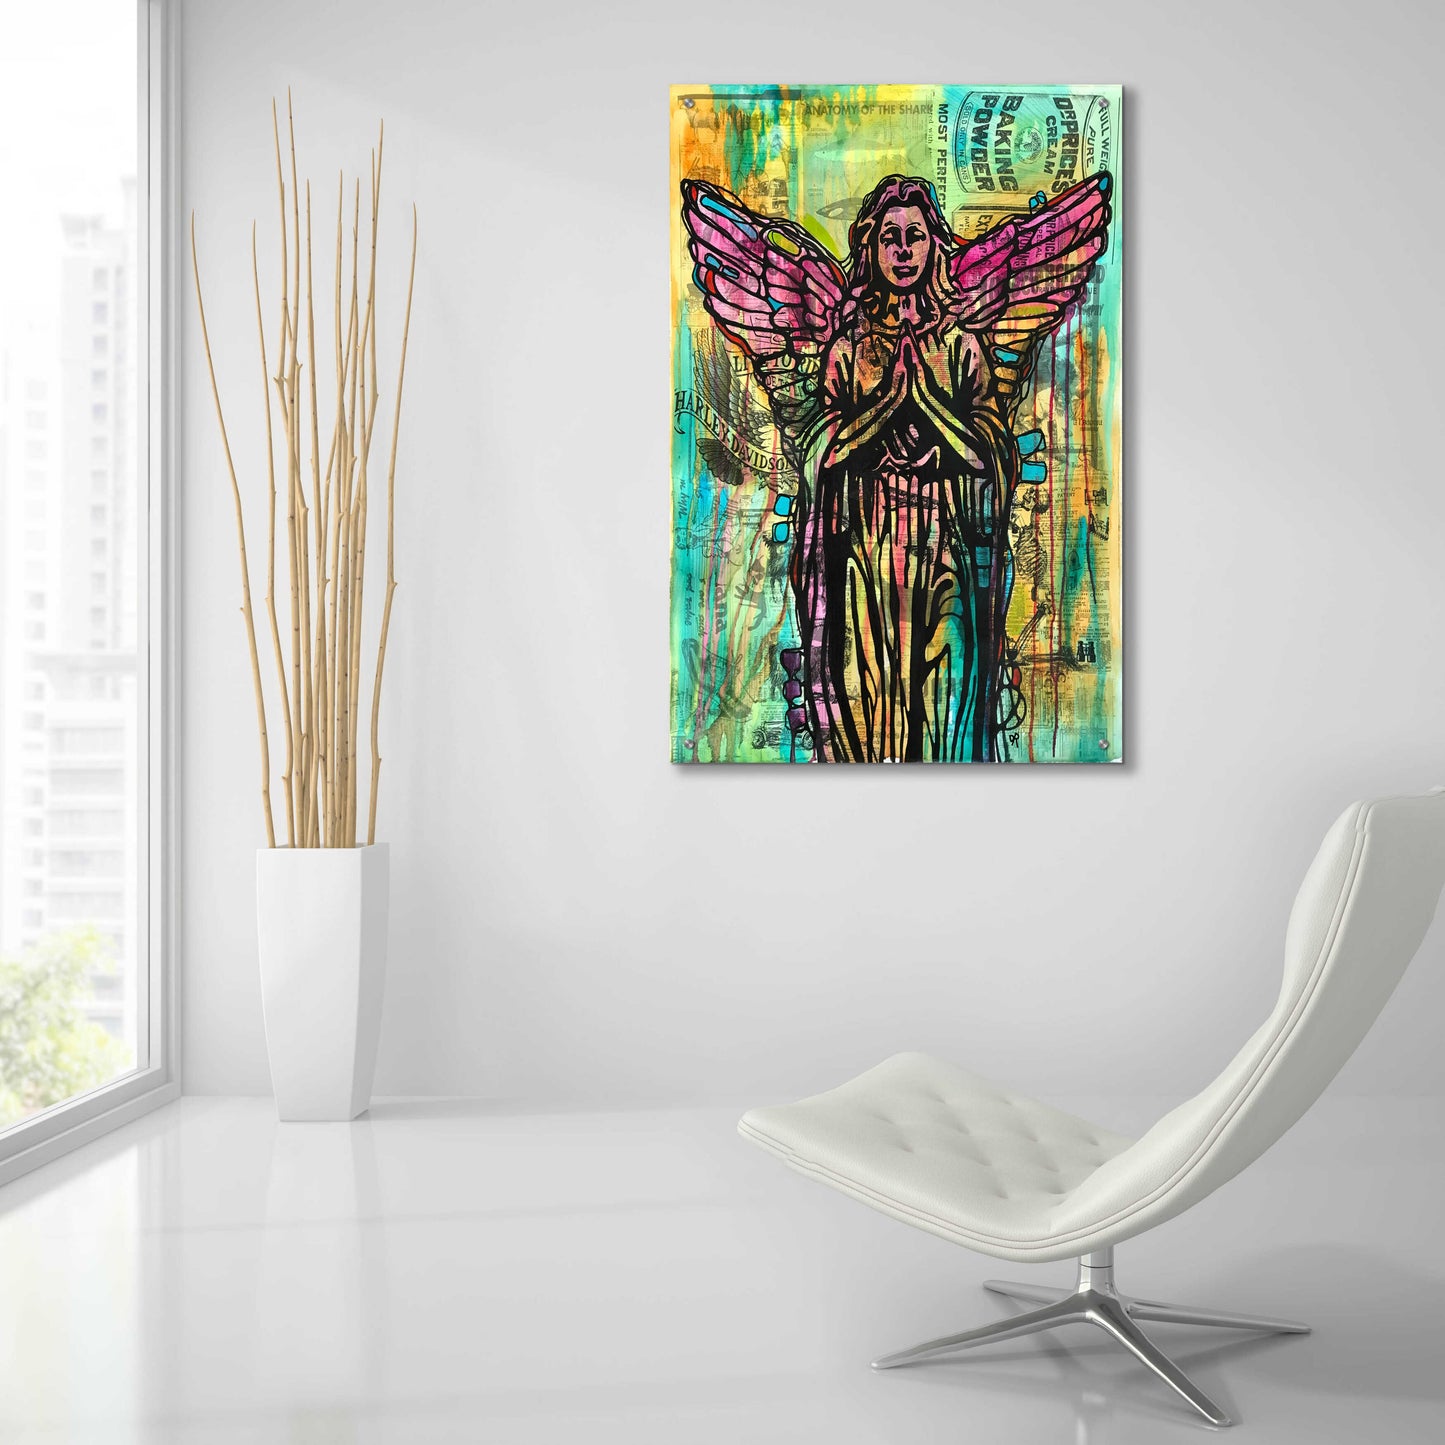 Epic Art 'Most Perfect Angel' by Dean Russo, Acrylic Glass Wall Art,24x36